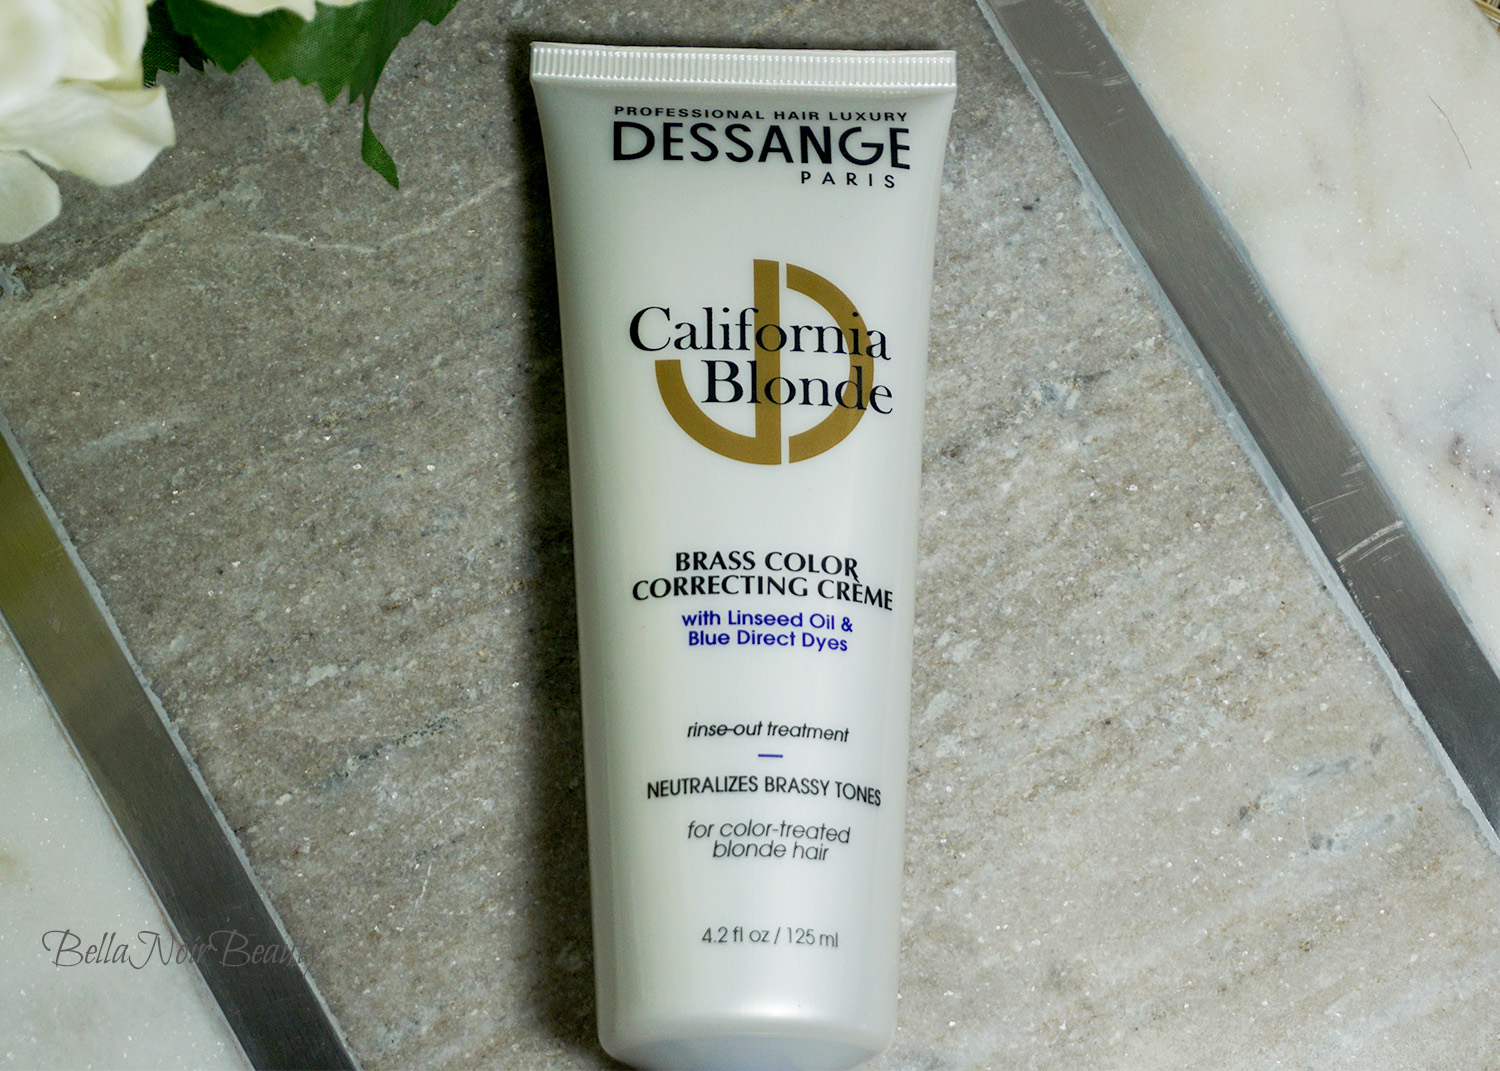 Dessange California Blonde Brass Color Correcting Creme: Before and After | bellanoirbeauty.com